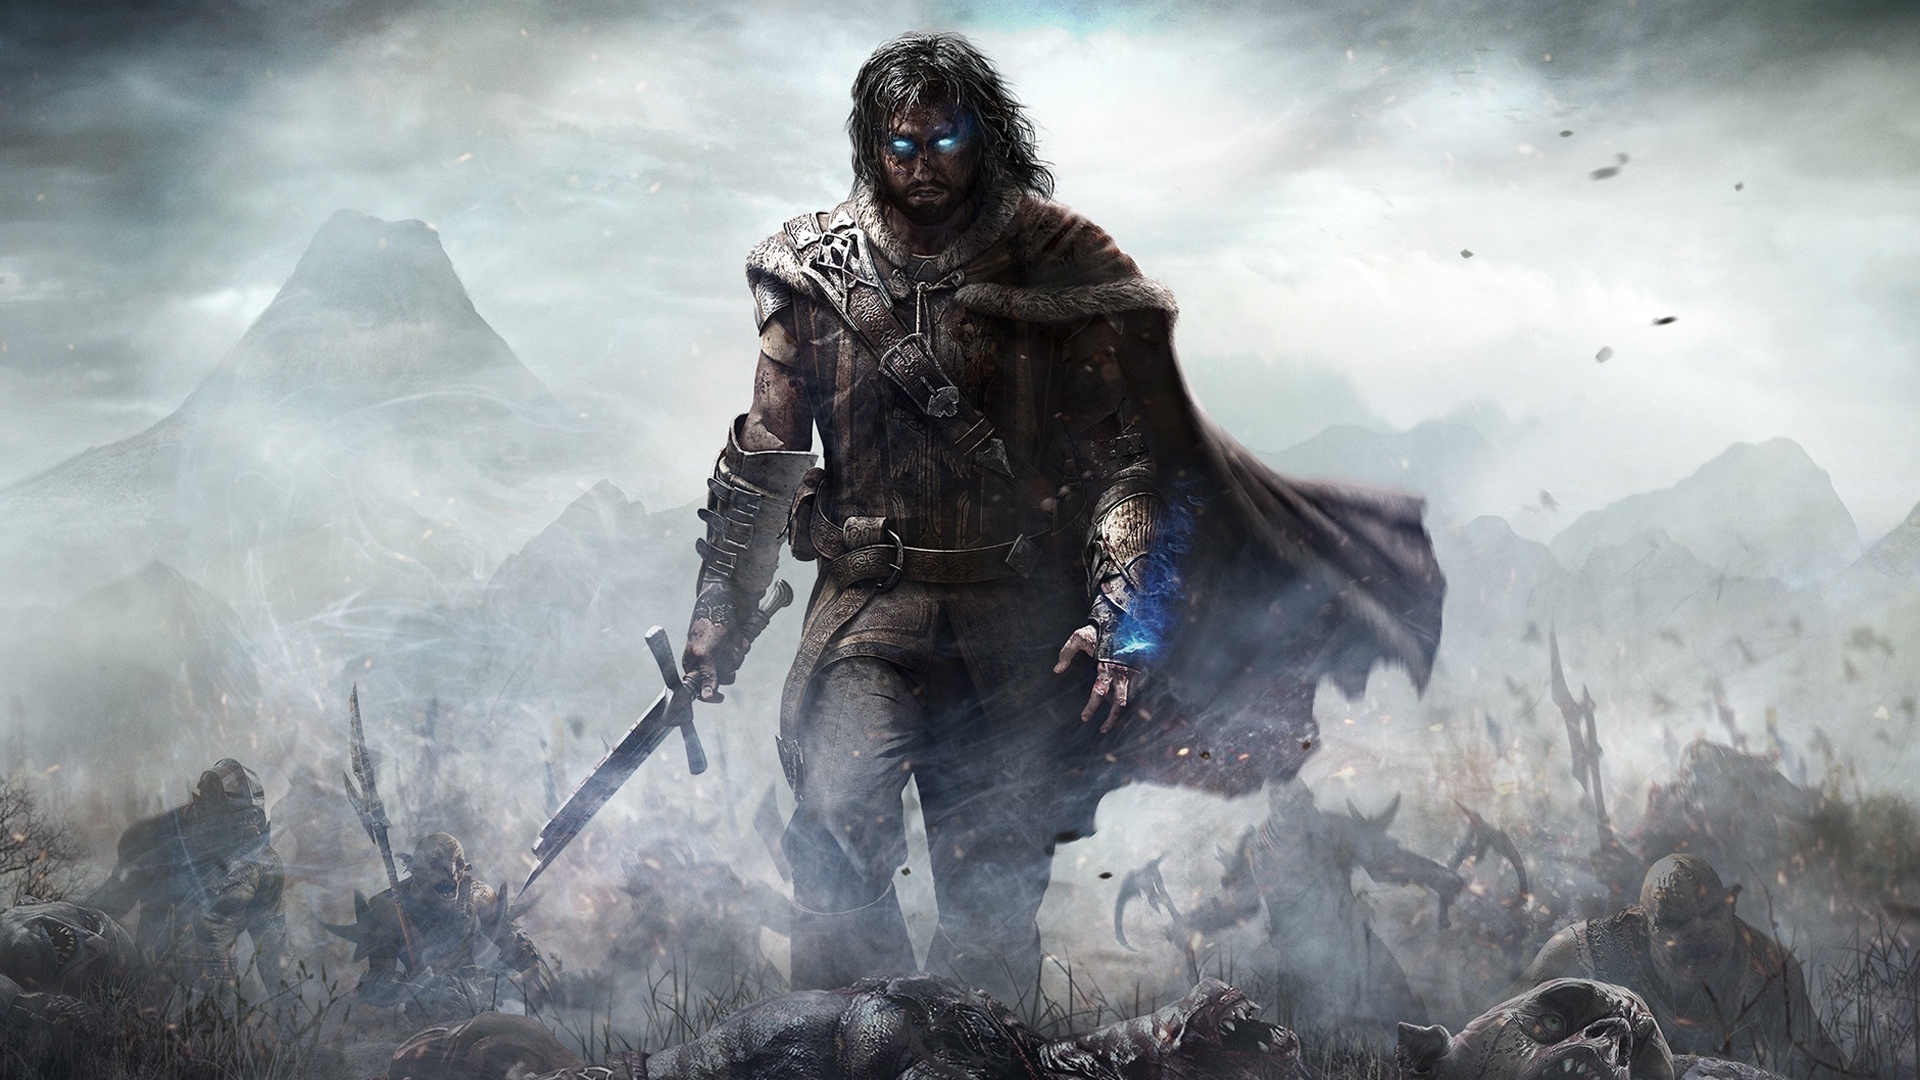 ps3 middle earth shadow of mordor